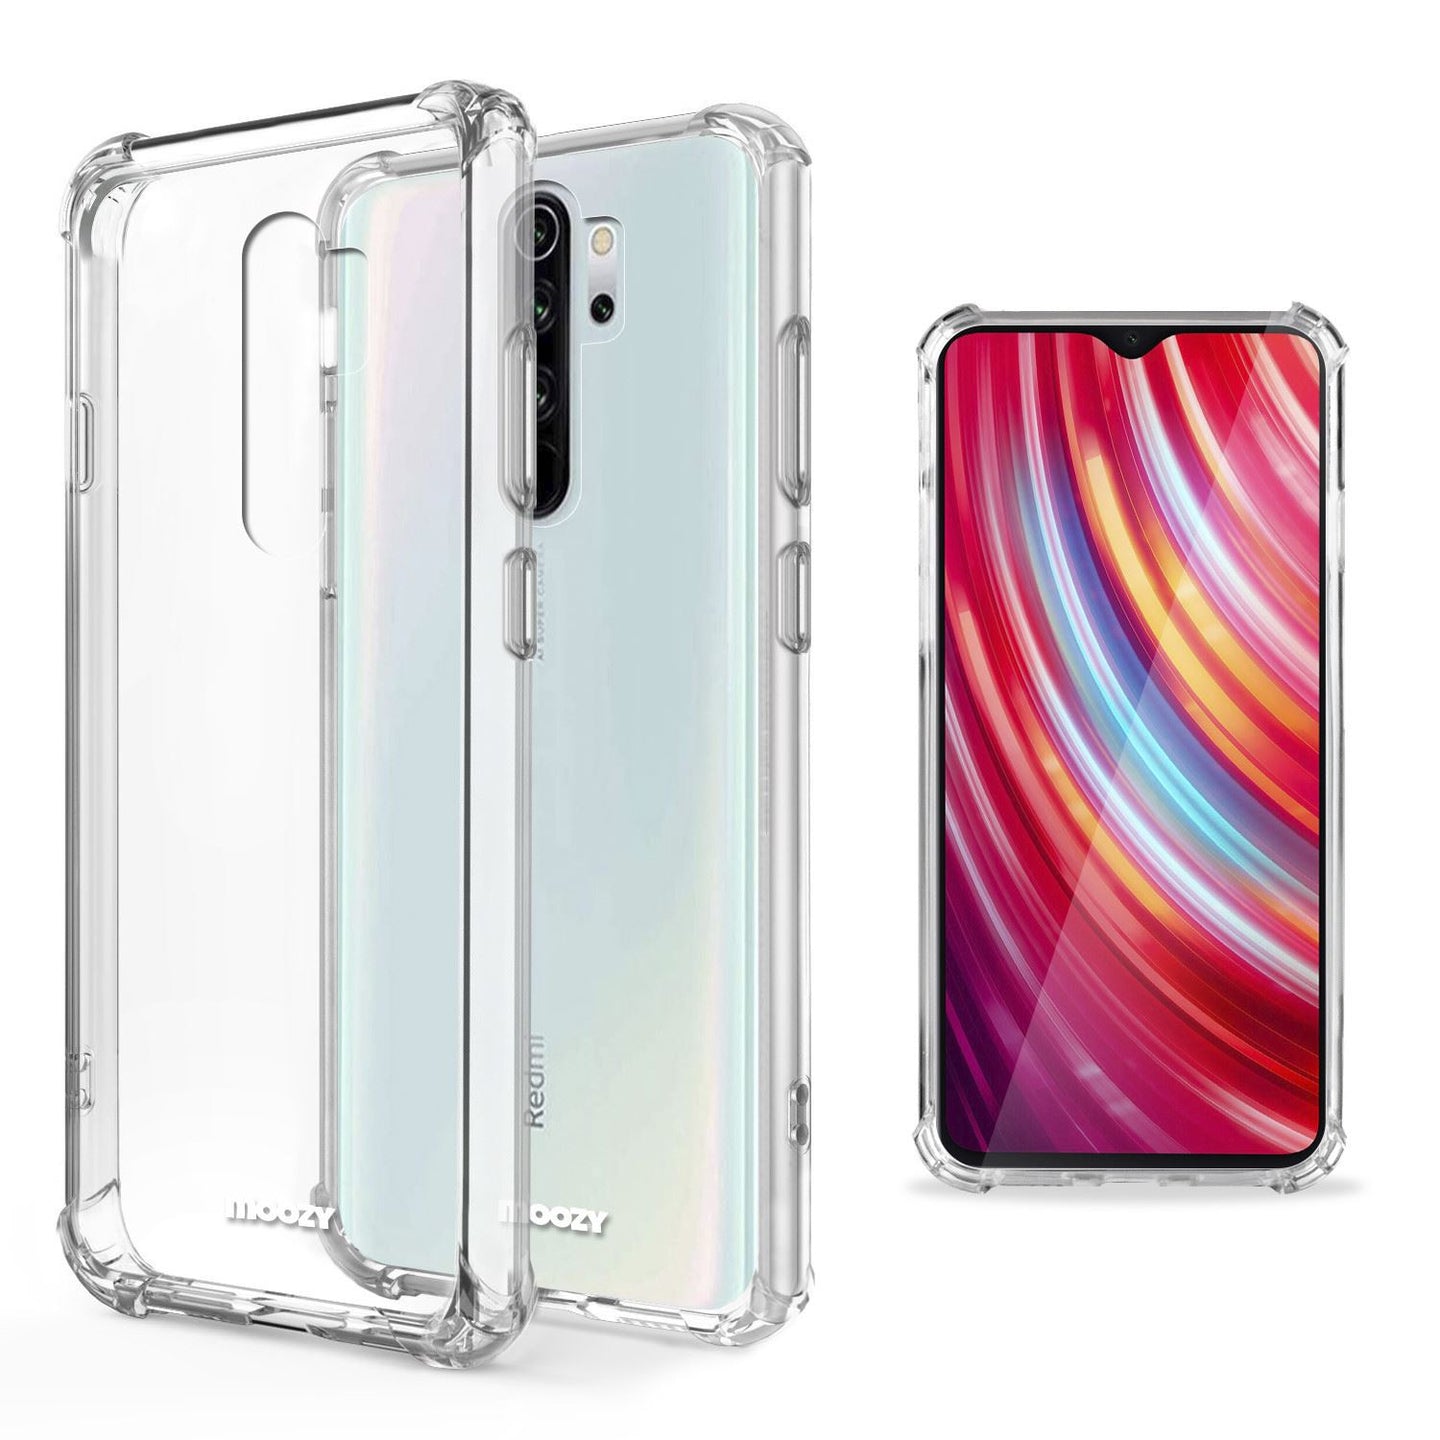 Moozy Shock Proof Silicone Case for Xiaomi Redmi Note 8 Pro - Transparent Crystal Clear Phone Case Soft TPU Cover